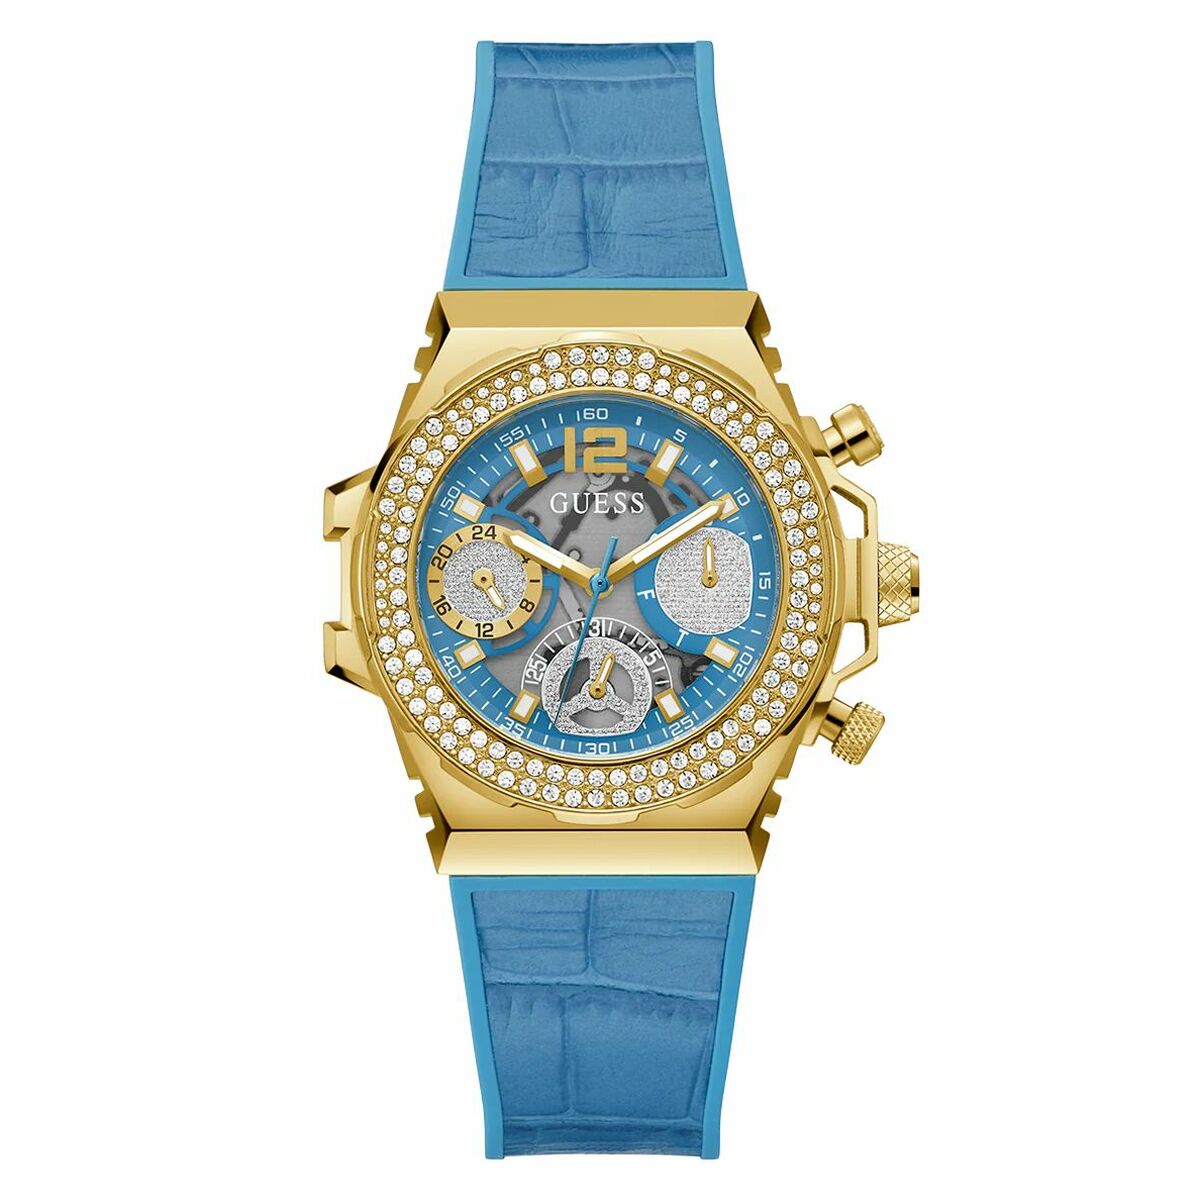 Ladies' Watch Guess GW0553L3 (Ø 36 mm), Guess, Watches, Women, ladies-watch-guess-gw0553l3-o-36-mm, Brand_Guess, category-reference-2570, category-reference-2635, category-reference-2995, category-reference-t-19667, category-reference-t-19725, category-reference-t-20352, Condition_NEW, fashion, original gifts, Price_100 - 200, RiotNook